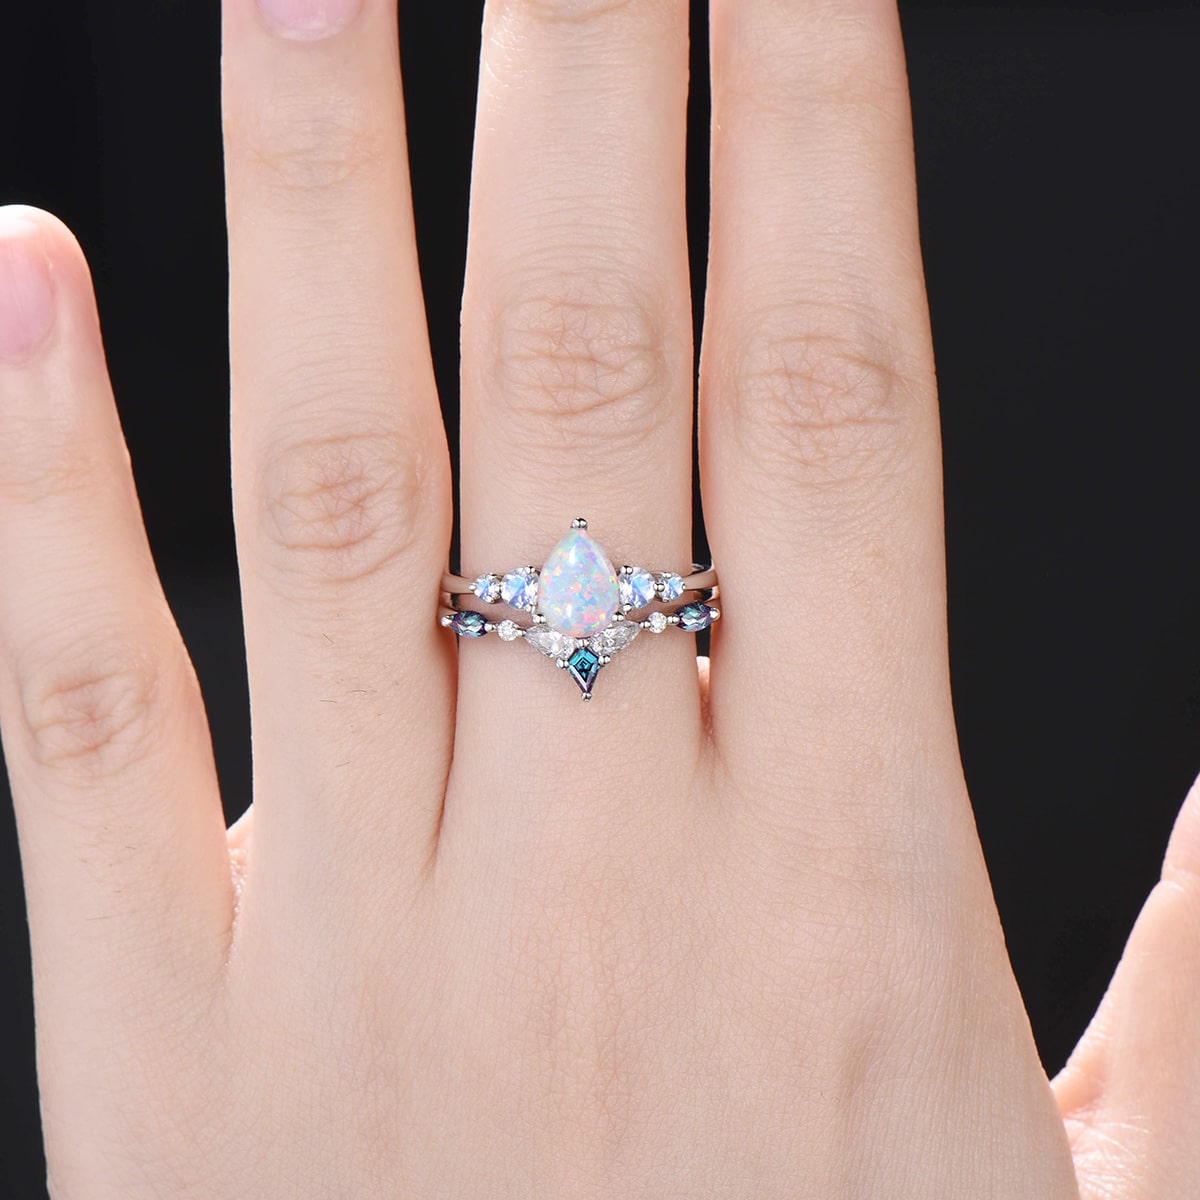 1.25CT Pear White Opal Engagement Ring Set Vintage Five stone Moonstone fire opal wedding set art deco kite alexandrite stacking band gift - PENFINE